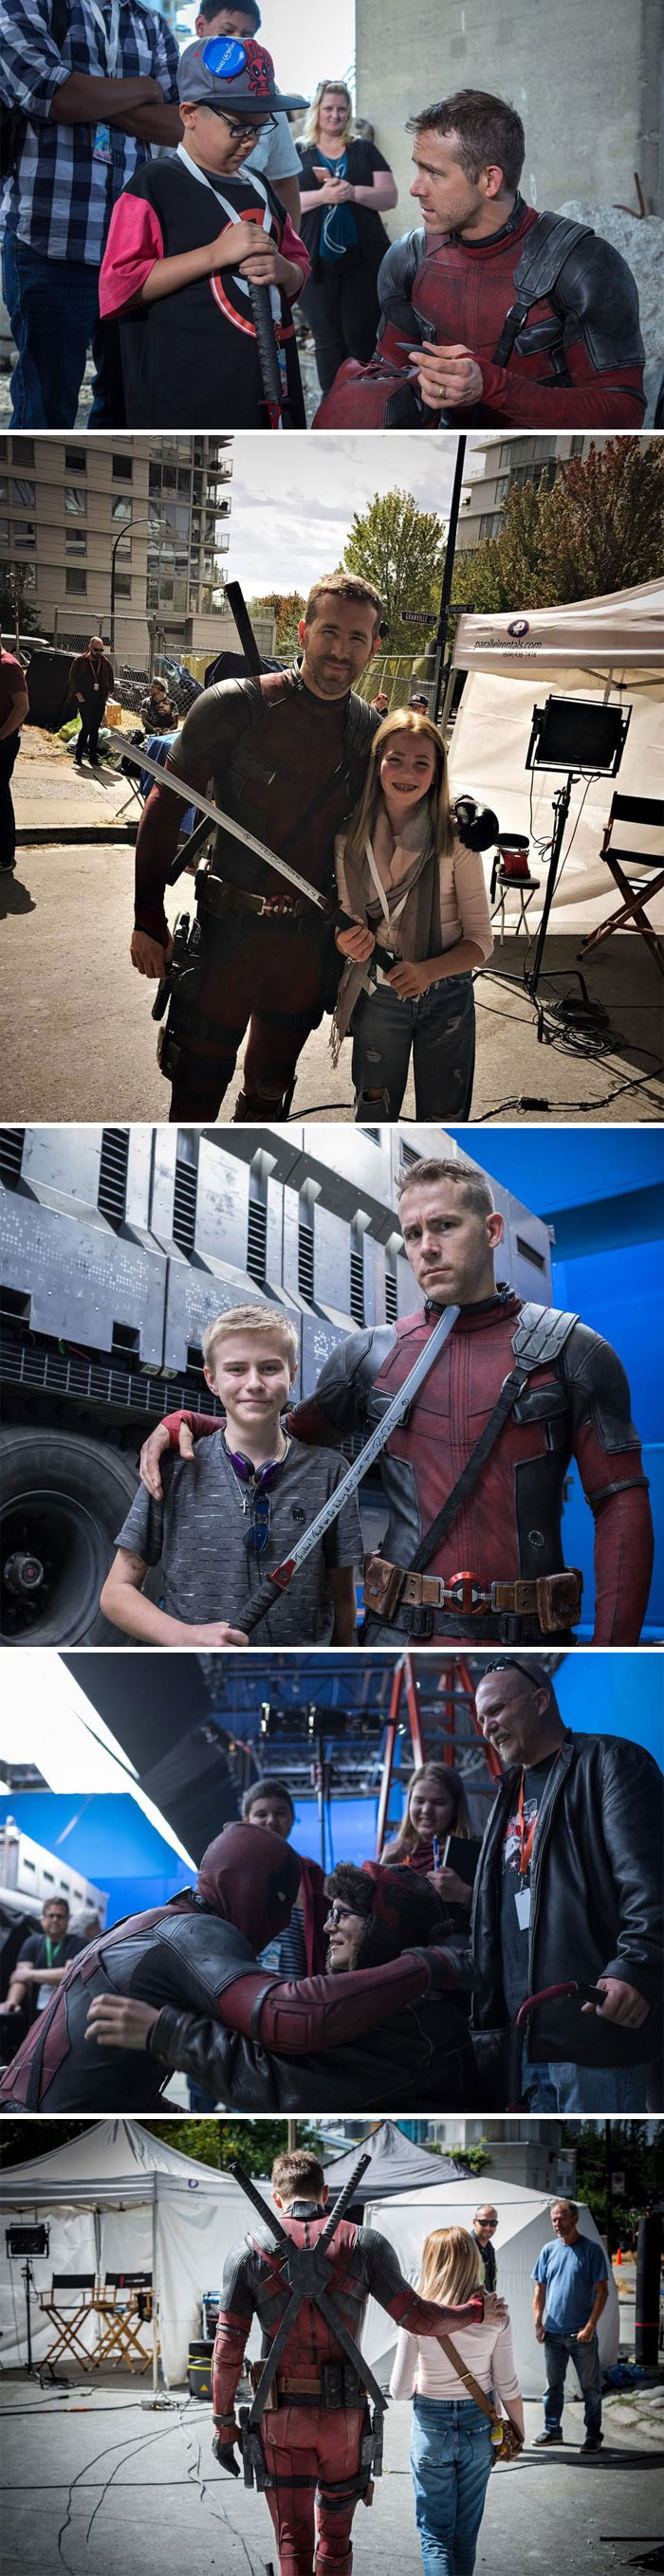 He Invited Kids From The Make-A-Wish Foundation To Hang Out With Him On The Set Of Deadpool